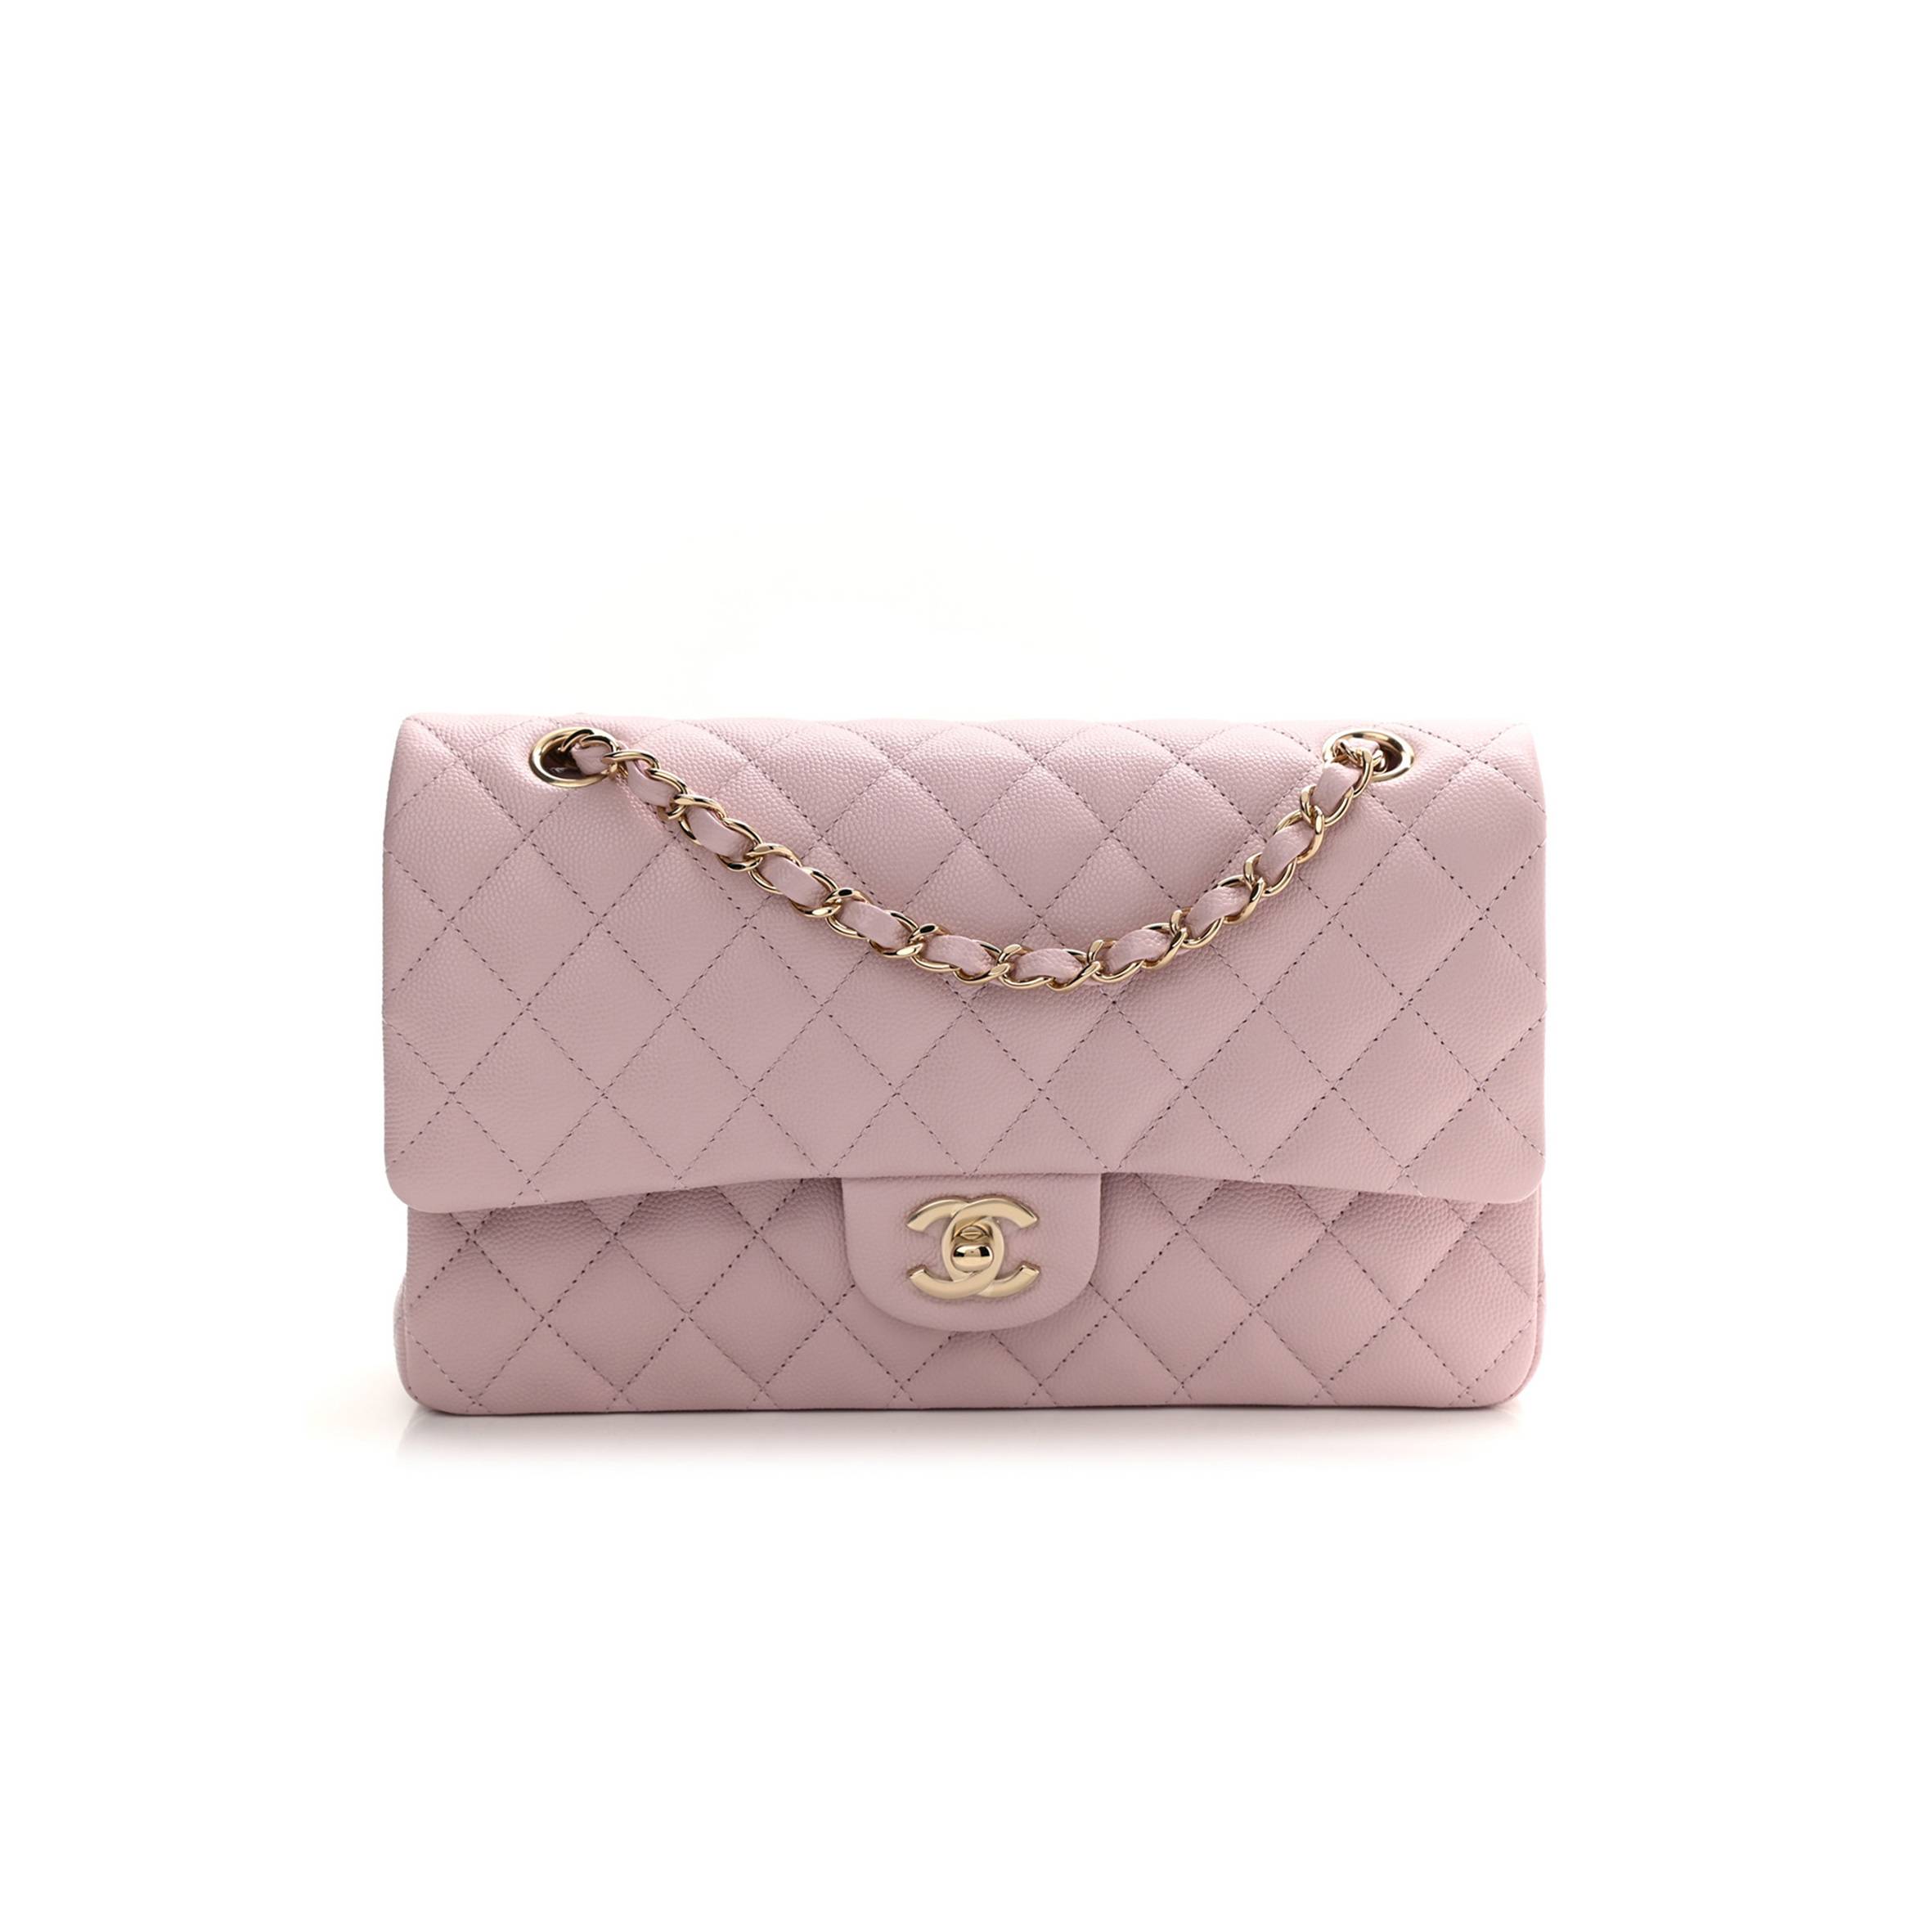 CHANEL CAVIAR QUILTED MEDIUM DOUBLE FLAP LIGHT PINK ROSE GOLD HARDWARE (25*15*6cm)